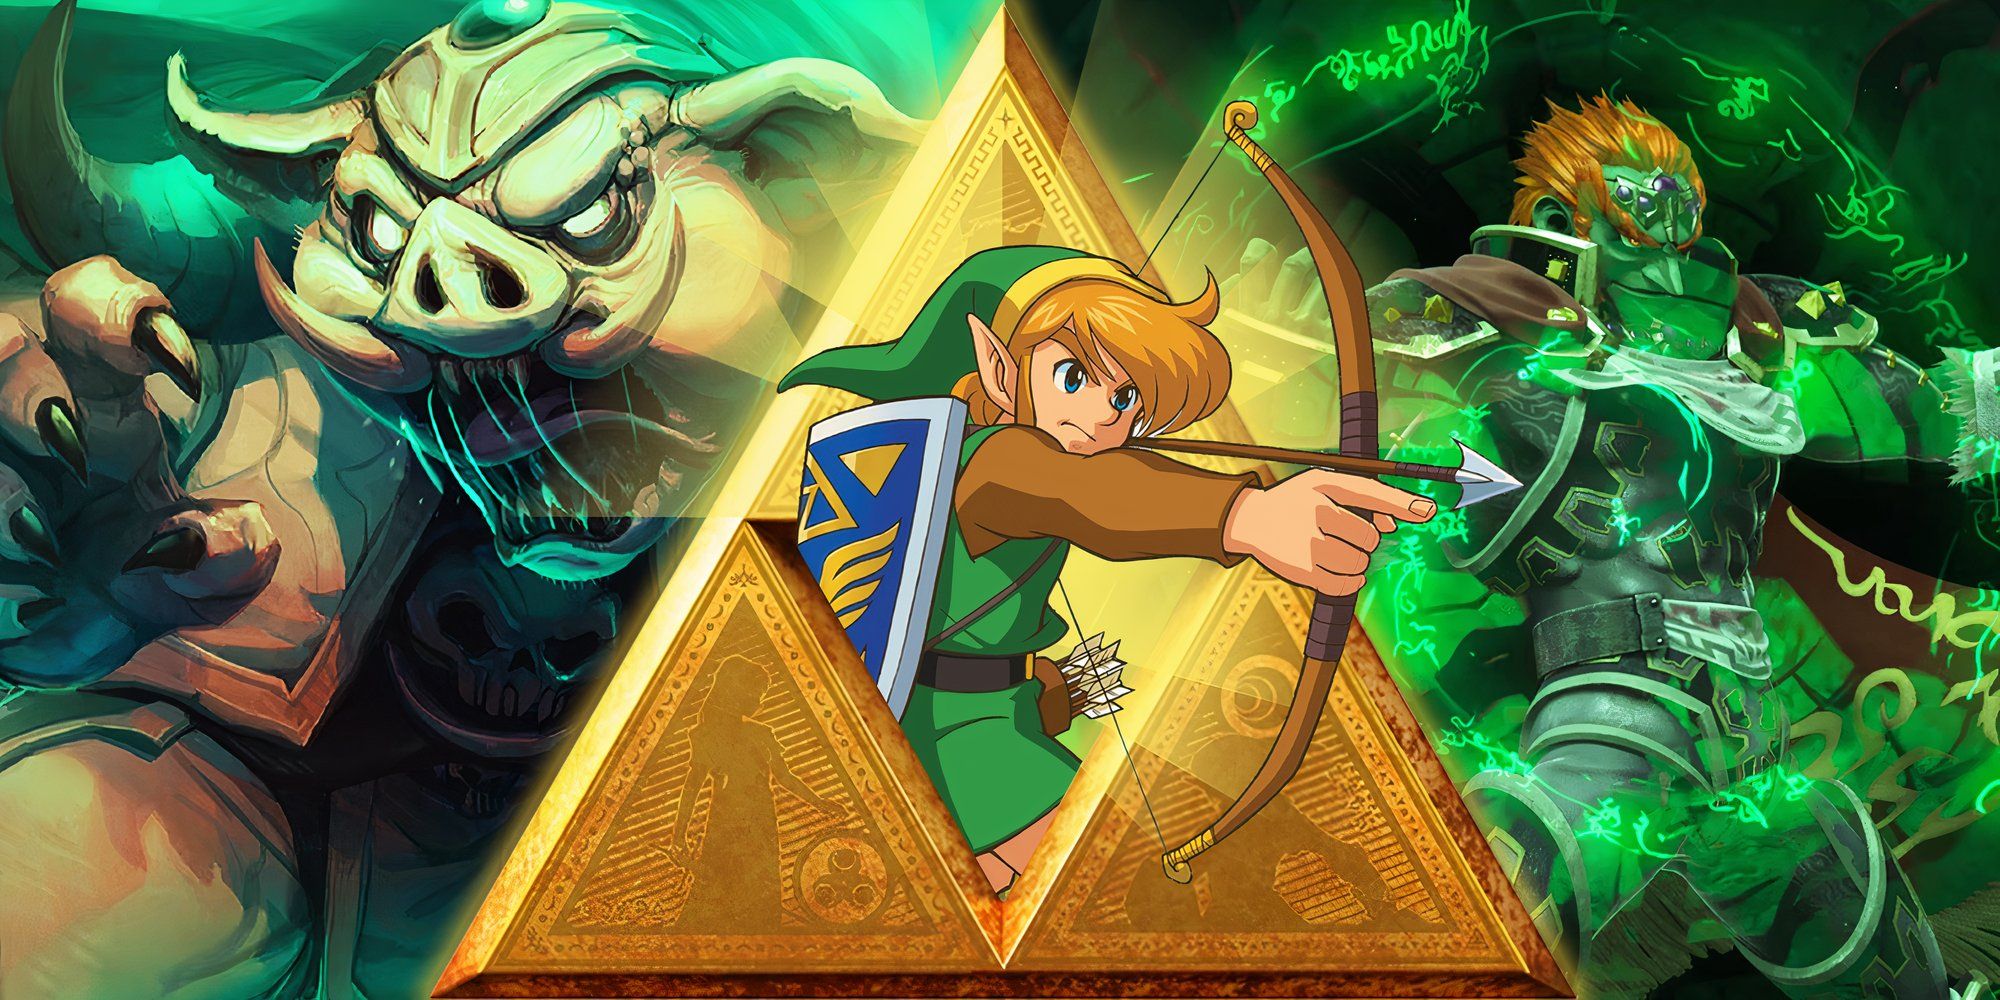 Link emerging from the Triforce ready for Ganon and Ganondorf in The Legend of Zelda